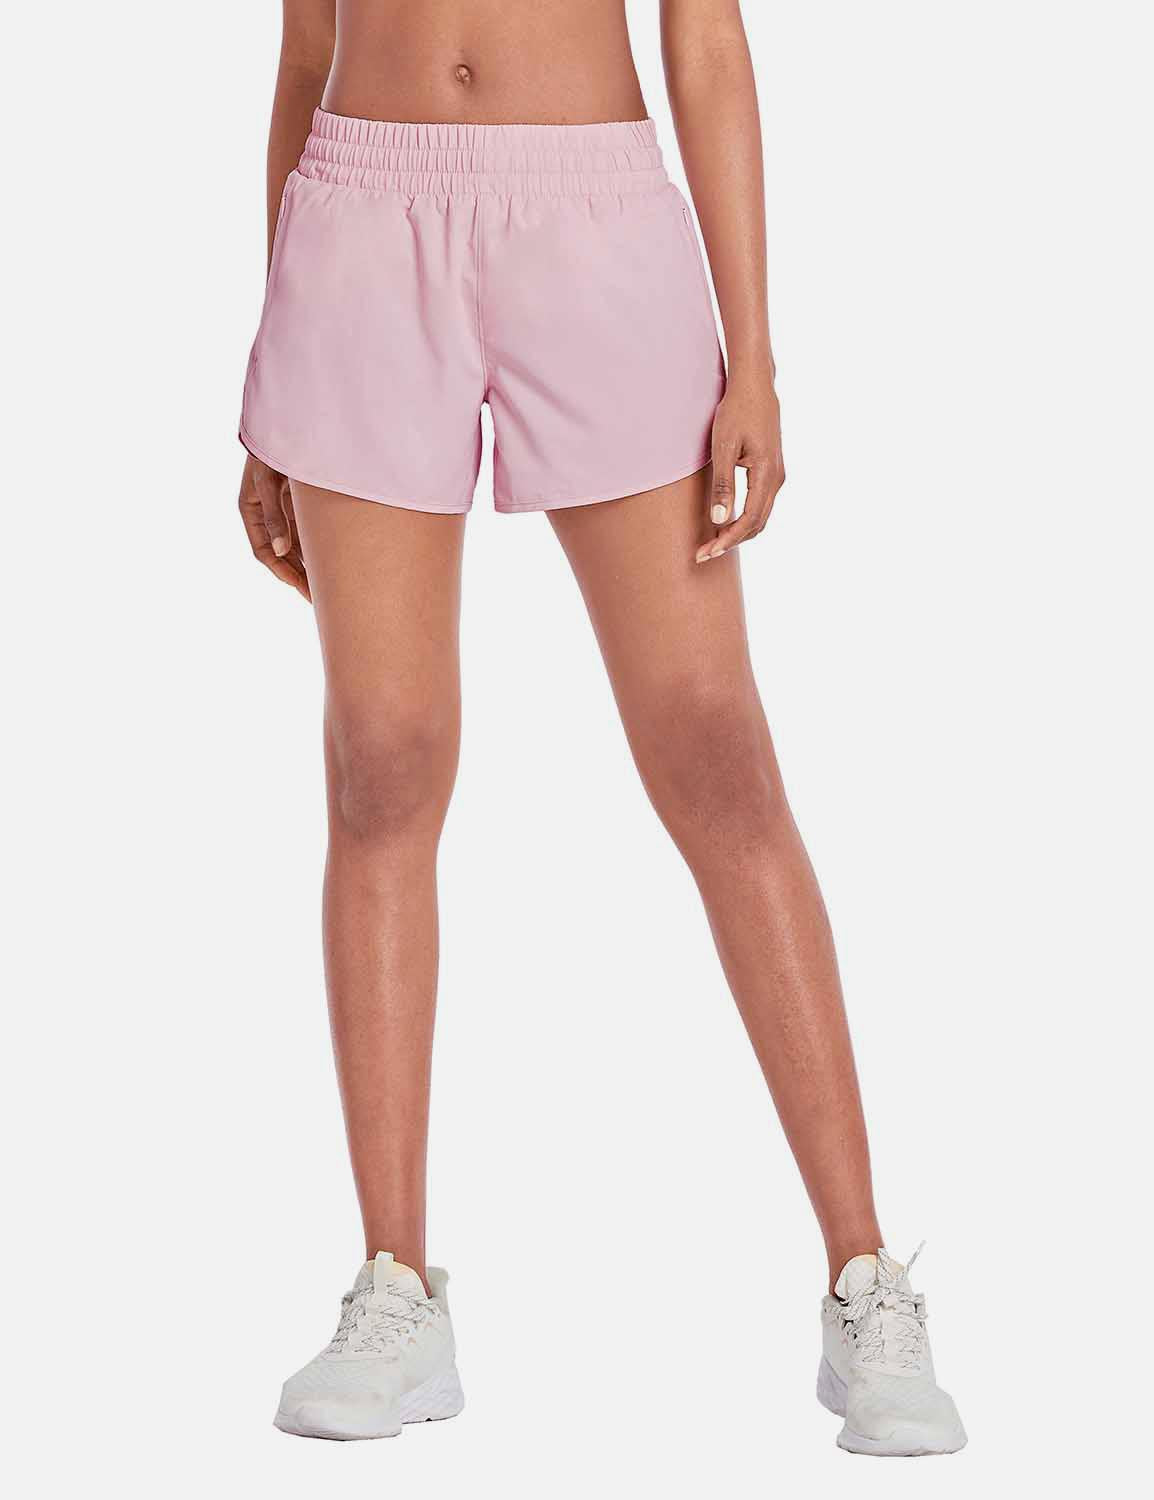 BALEAF Women's 4" 2-in-1 Elastic Waistband Pocketed Athletic Shorts cbd022 Pink Front